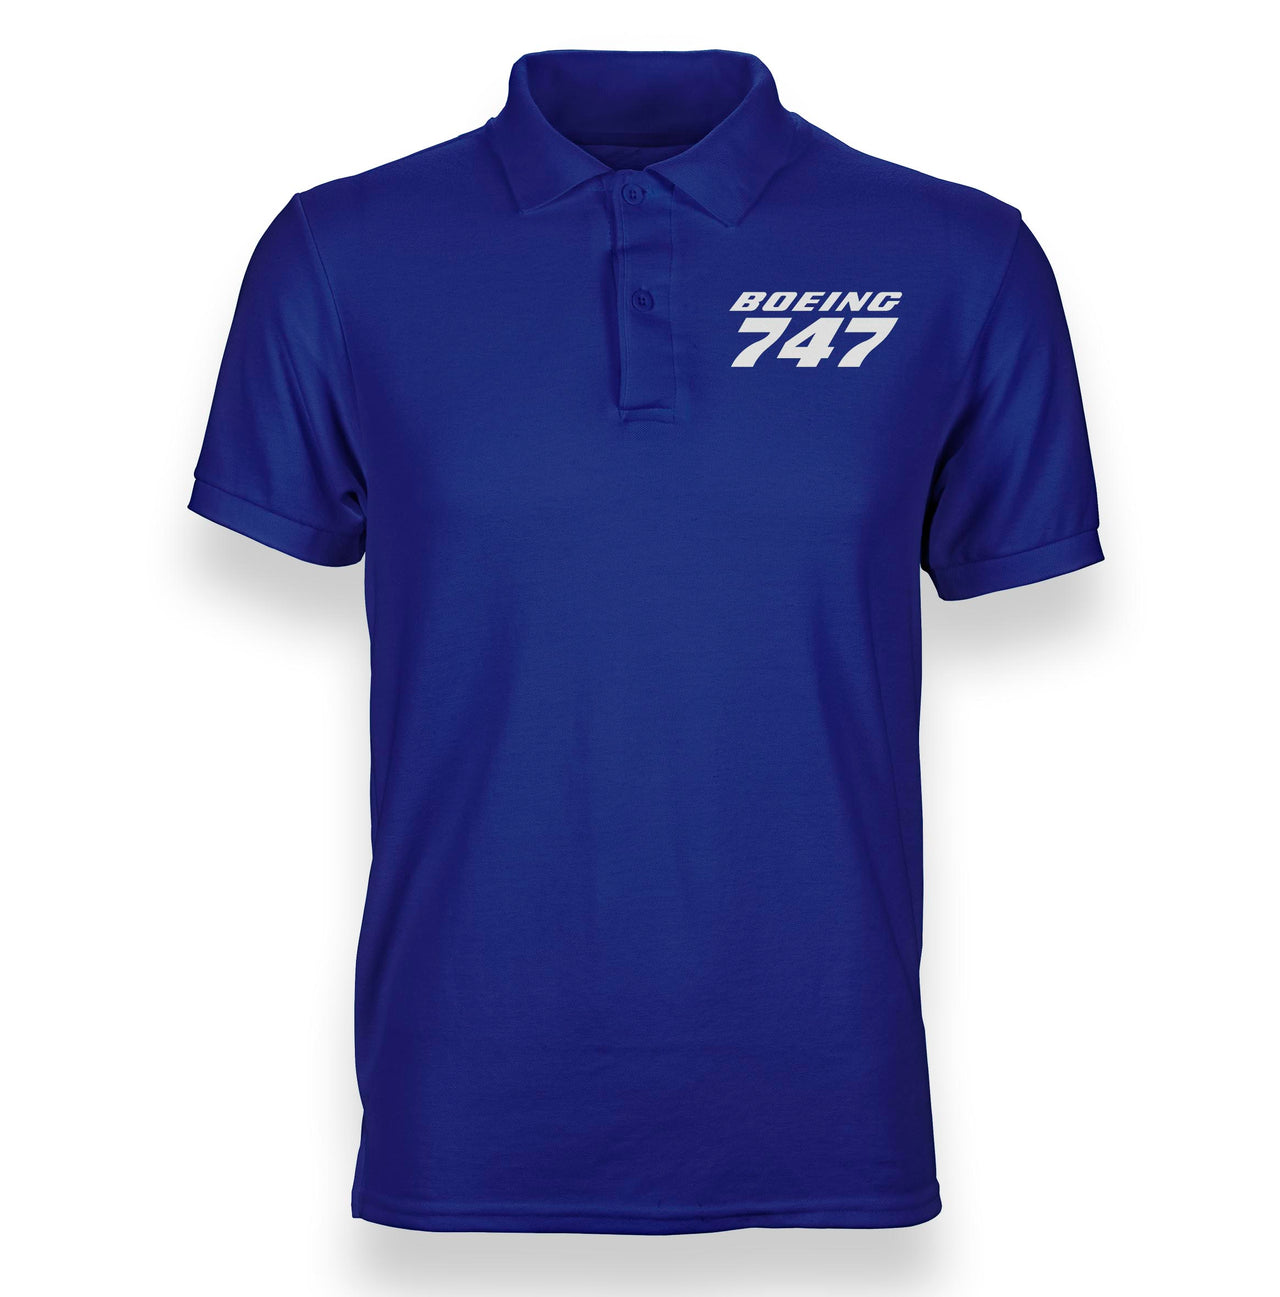 Boeing 747 & Text Designed Polo T-Shirts